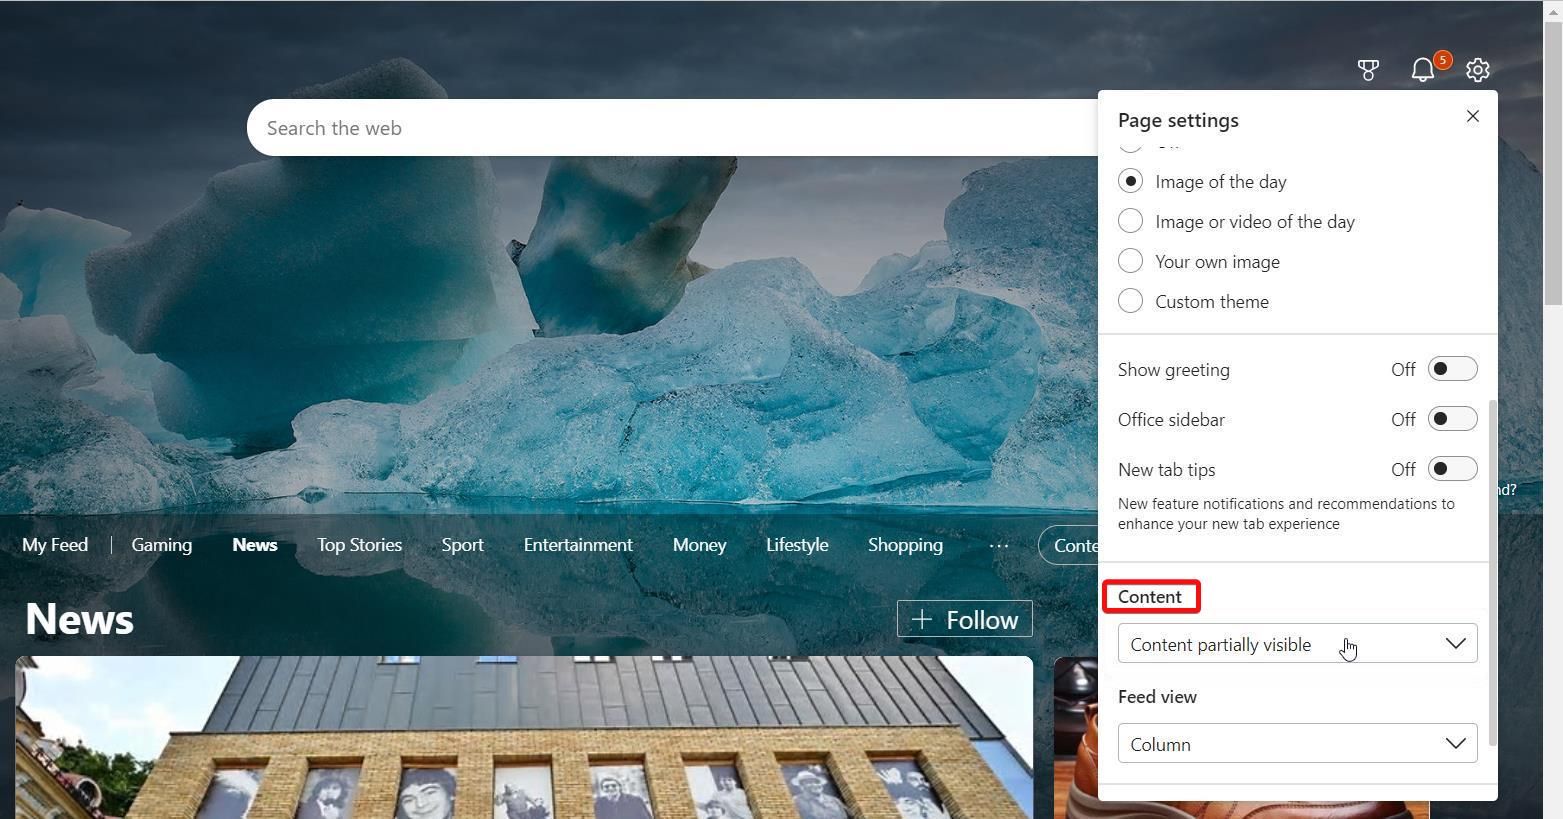 5 Microsoft Edge Habits for a Minimalist Browsing Experience